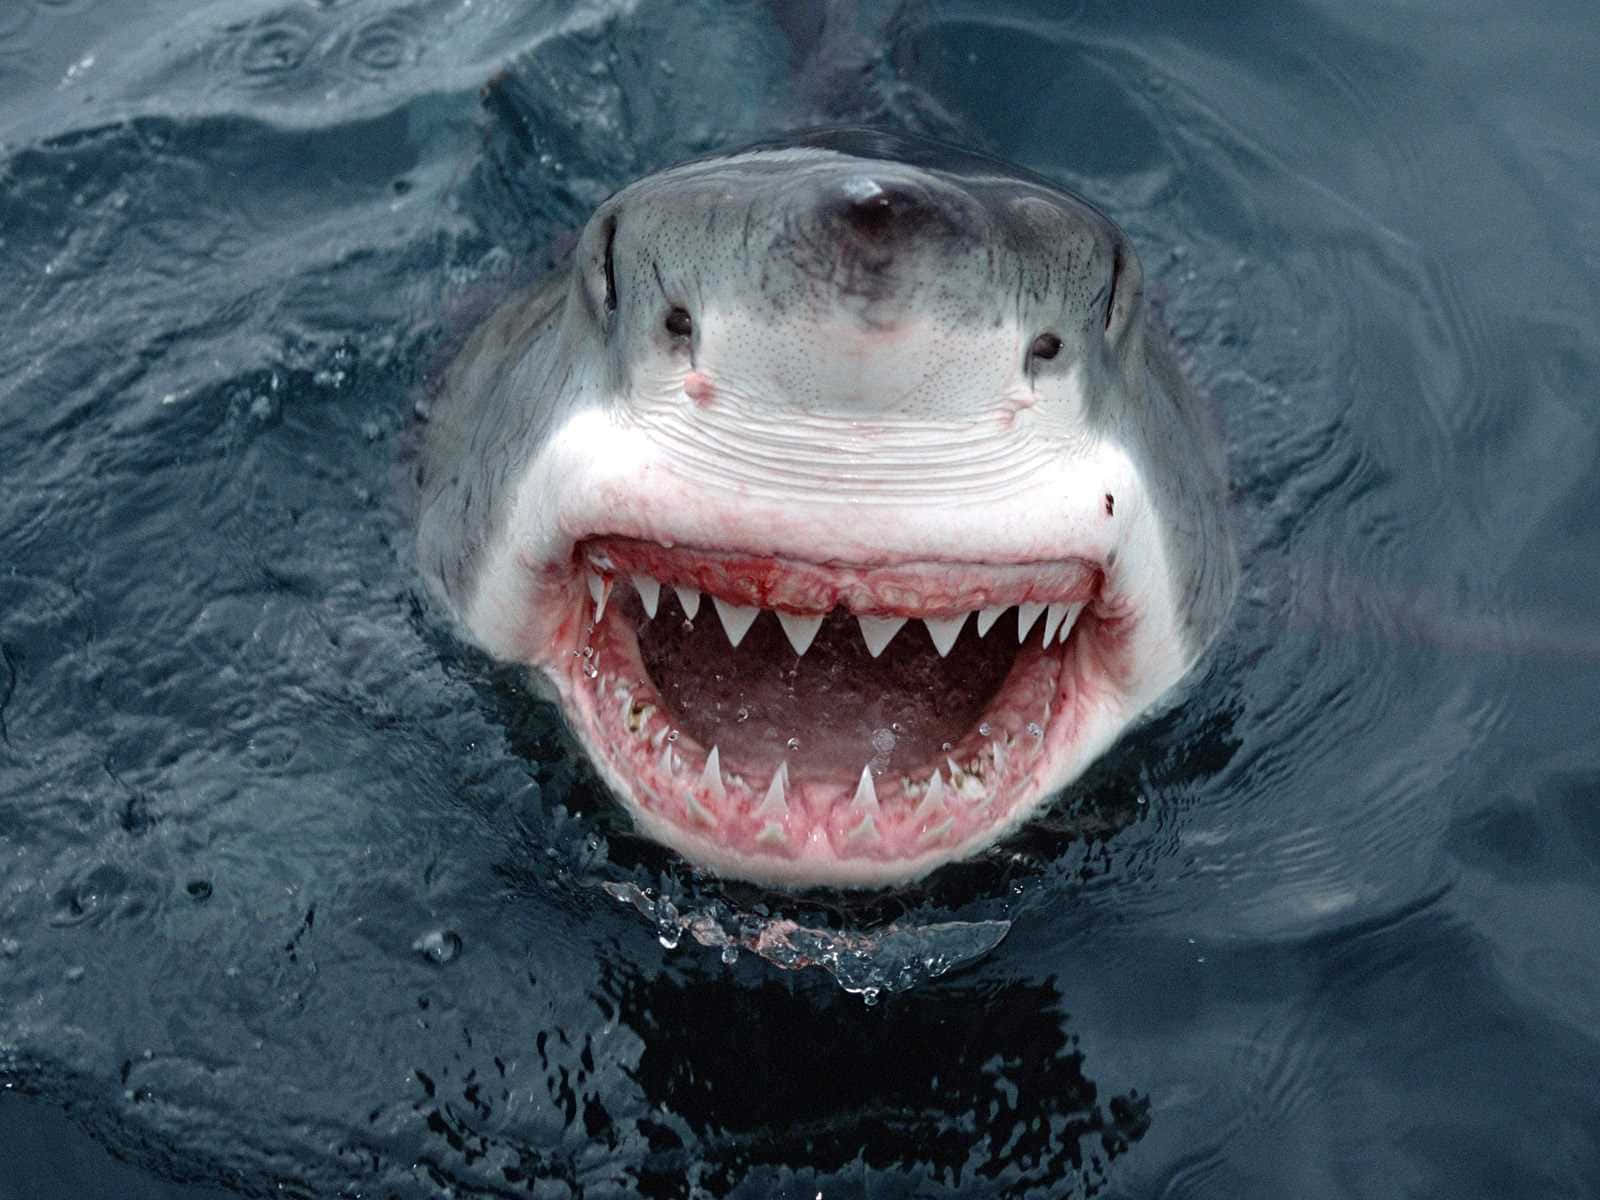 A close up of a great white shark moving through the open ocean